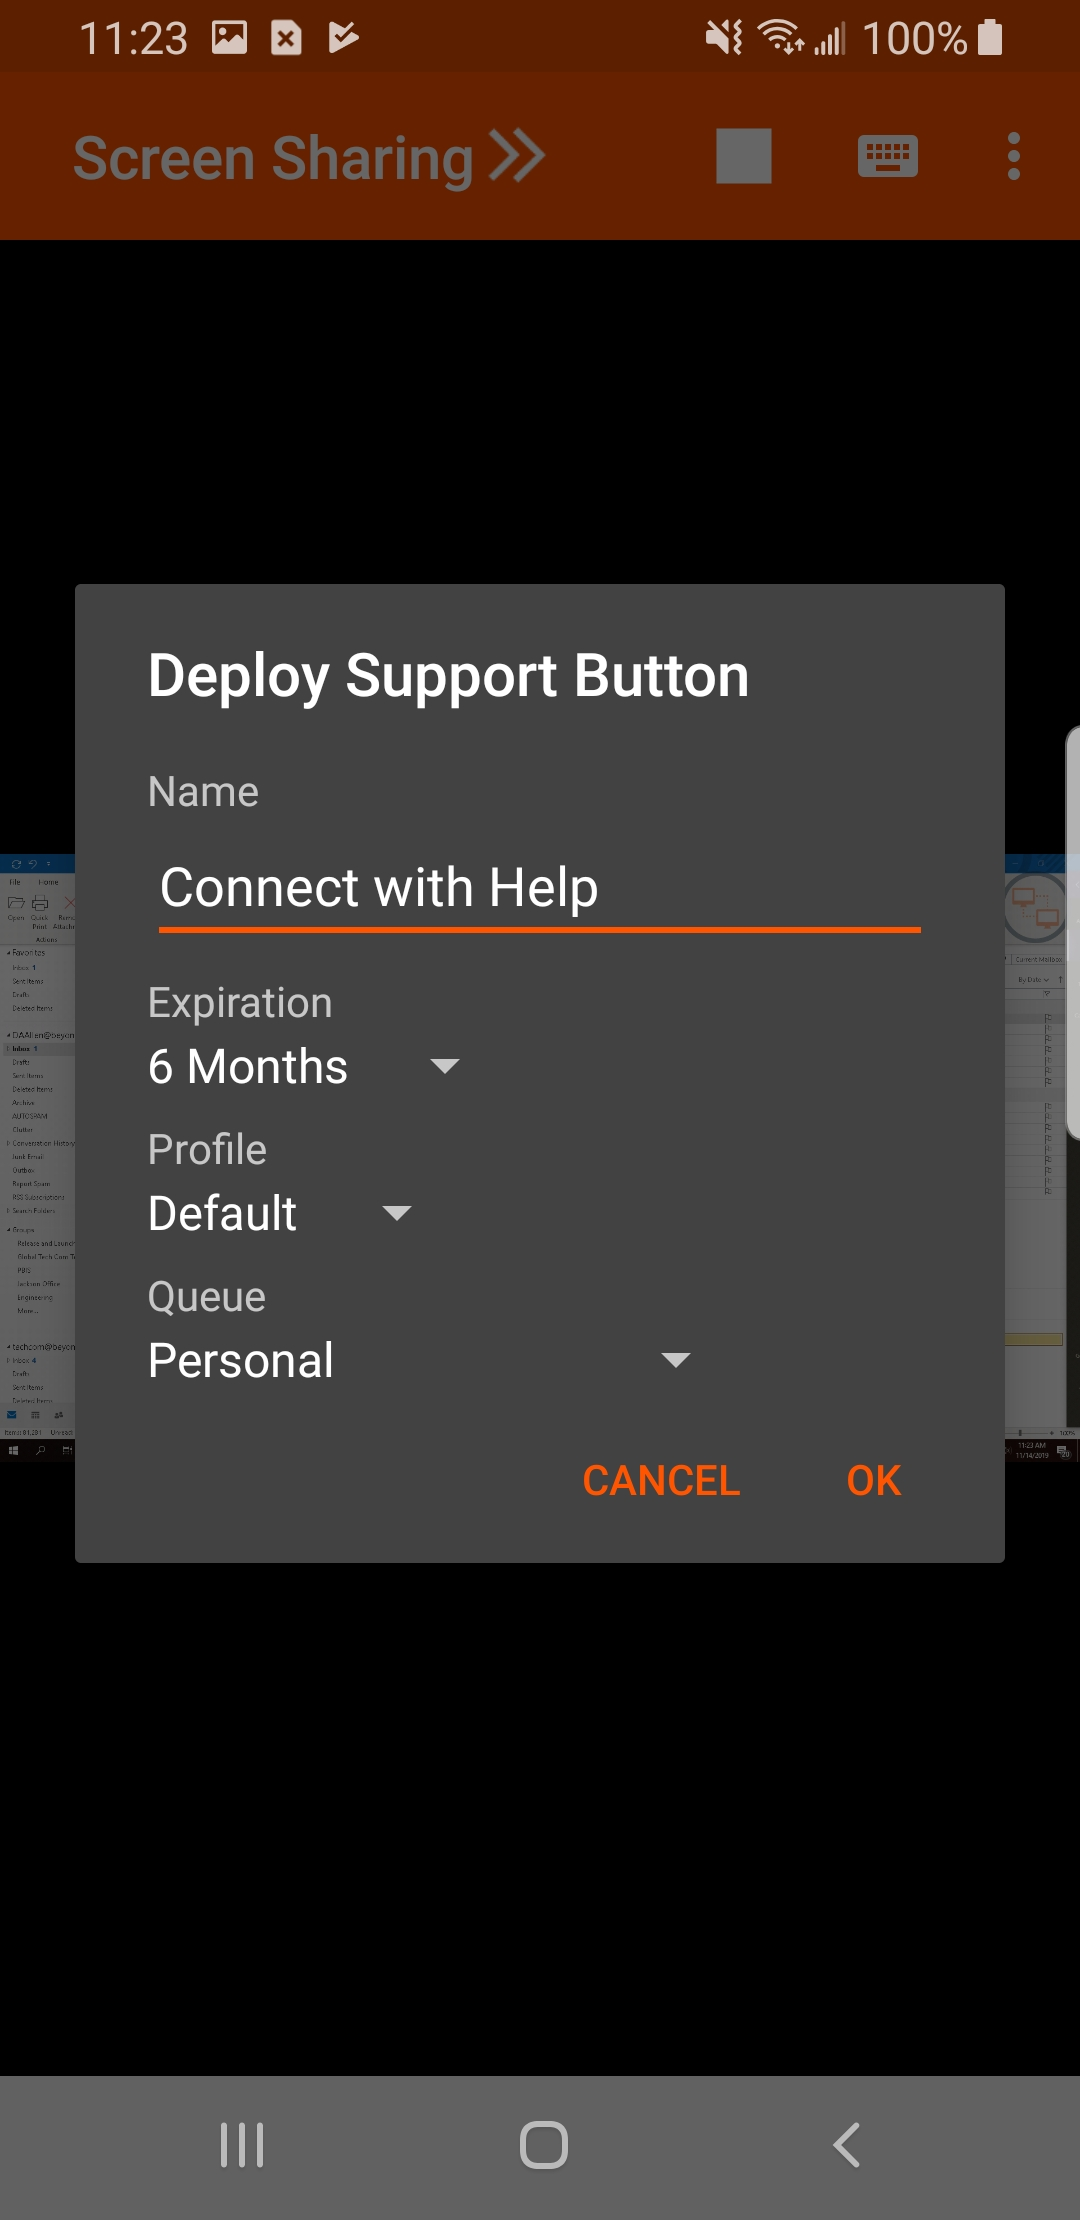 Deploy Support Button